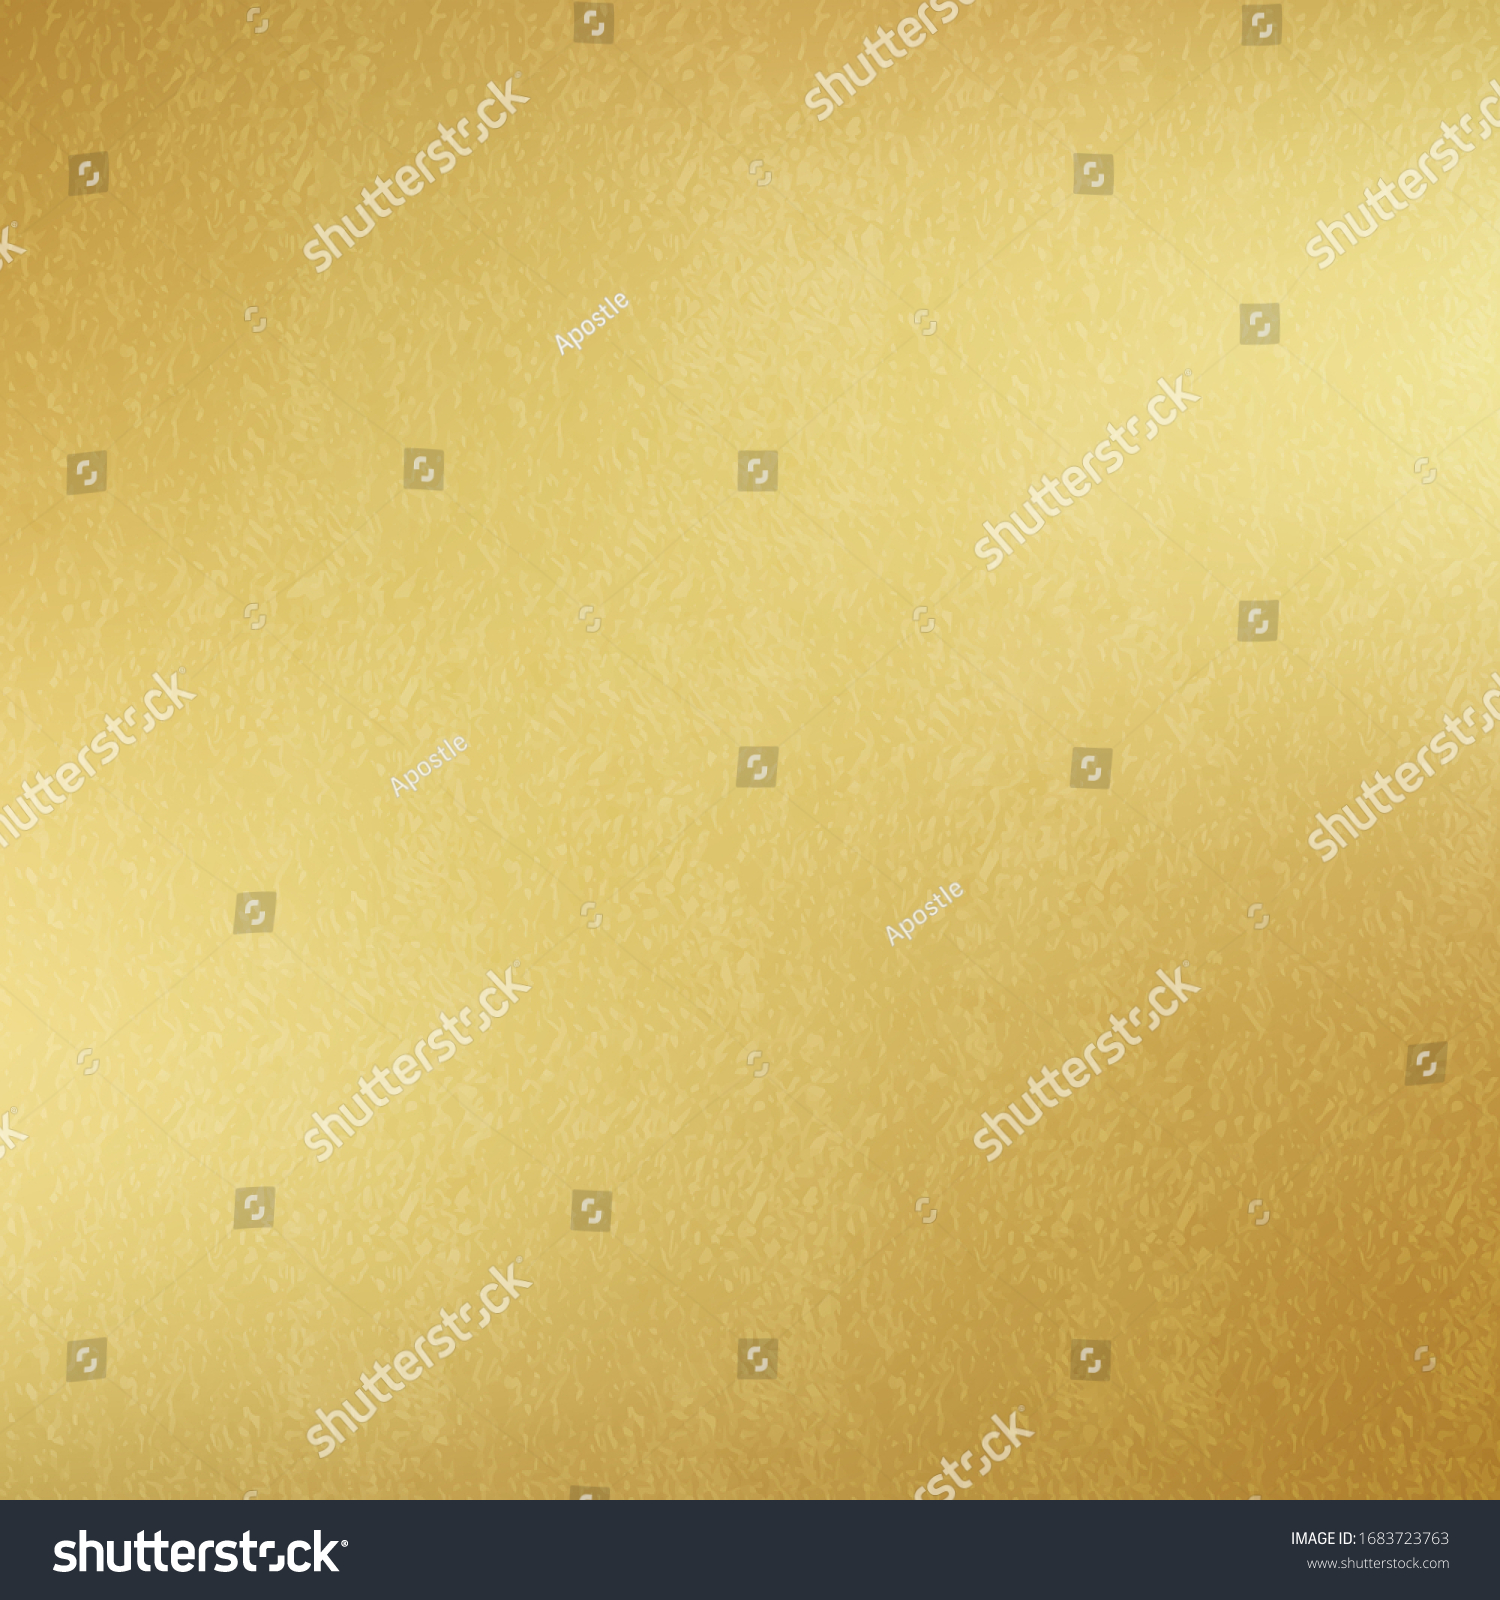 Shiny gold texture paper or metal. Golden vector background. #1683723763